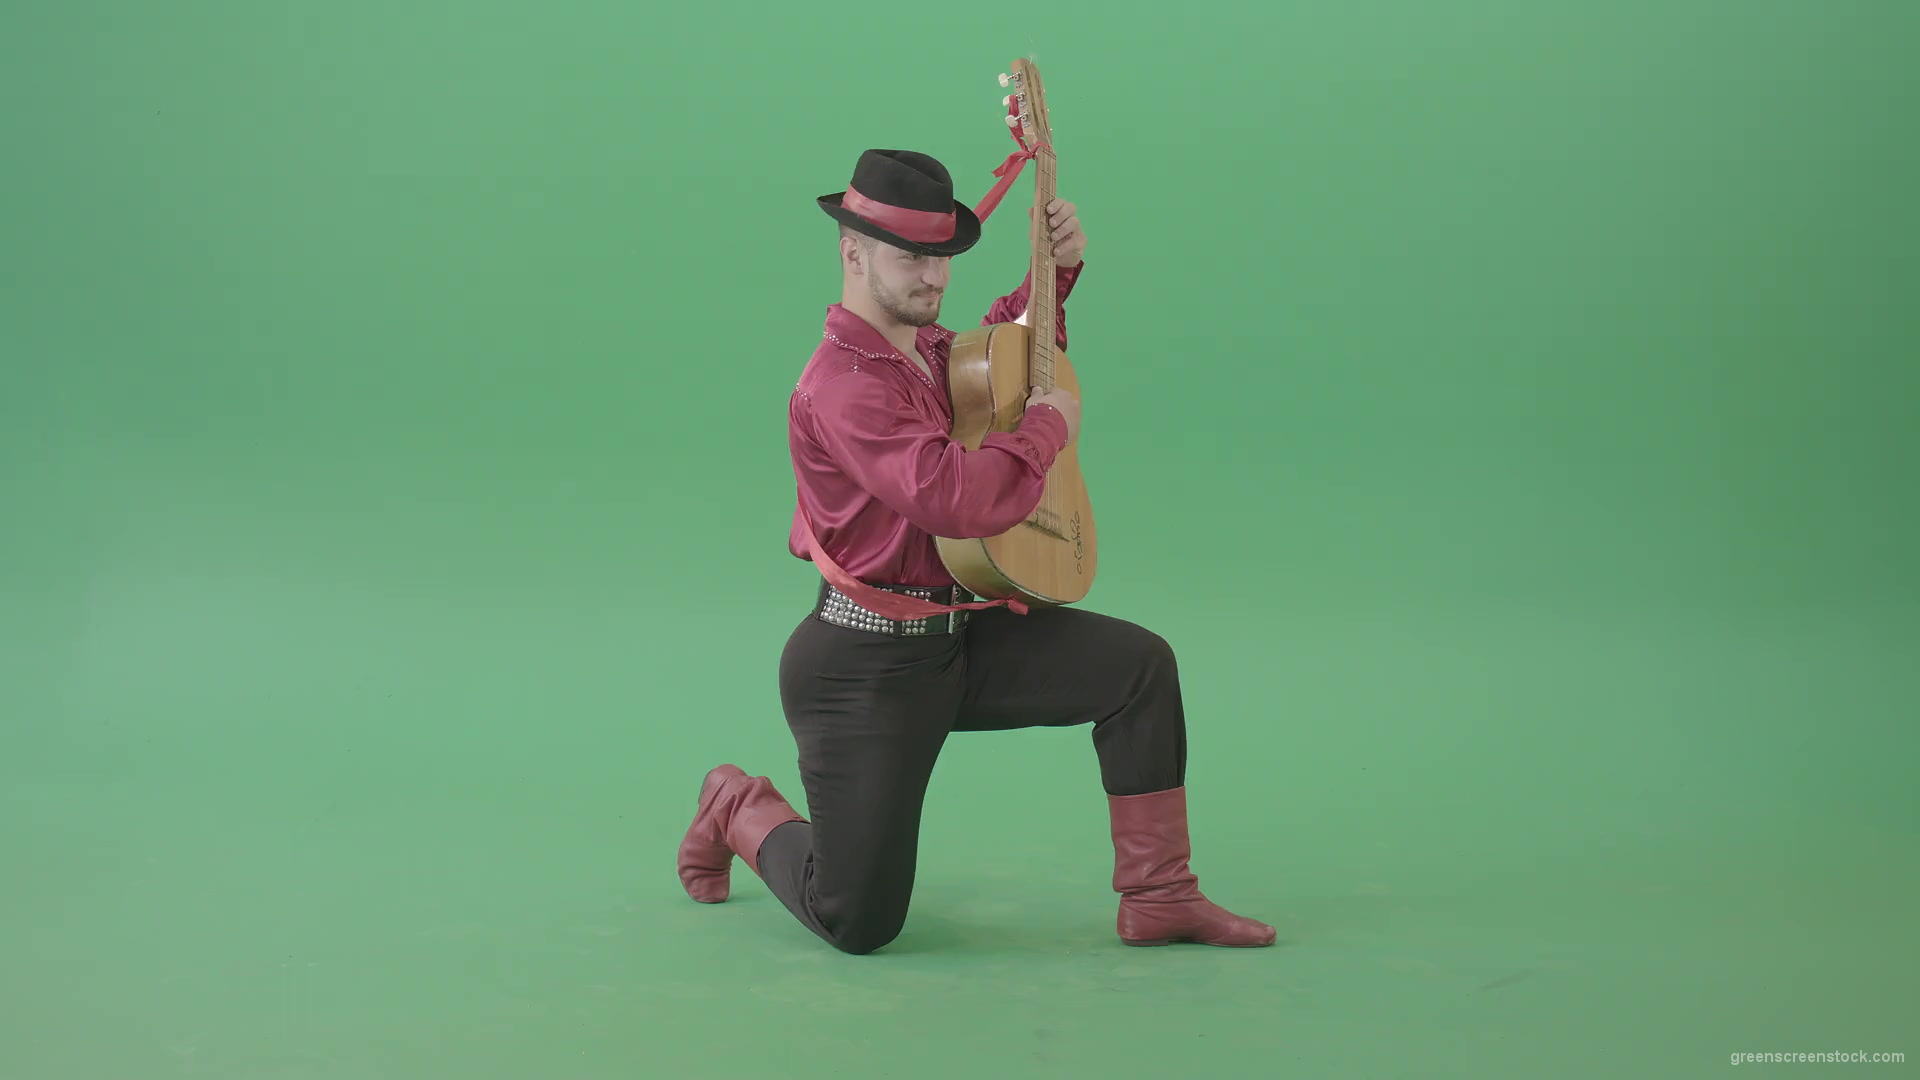 Man-in-Gipsy-costume-playing-love-song-on-guitar-isolated-on-green-screen-4K-Video-Footage-1920_001 Green Screen Stock